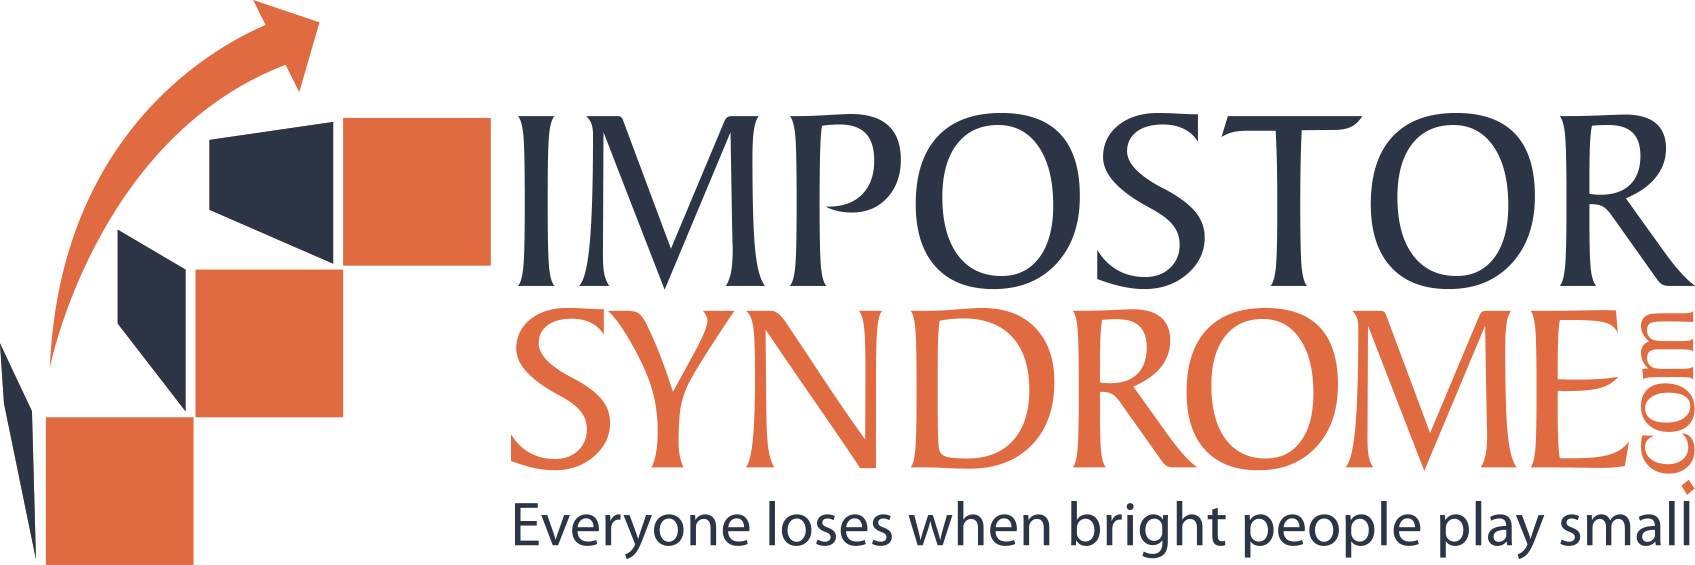 10 Steps You Can Use To Overcome Impostor Syndrome Impostor Syndrome